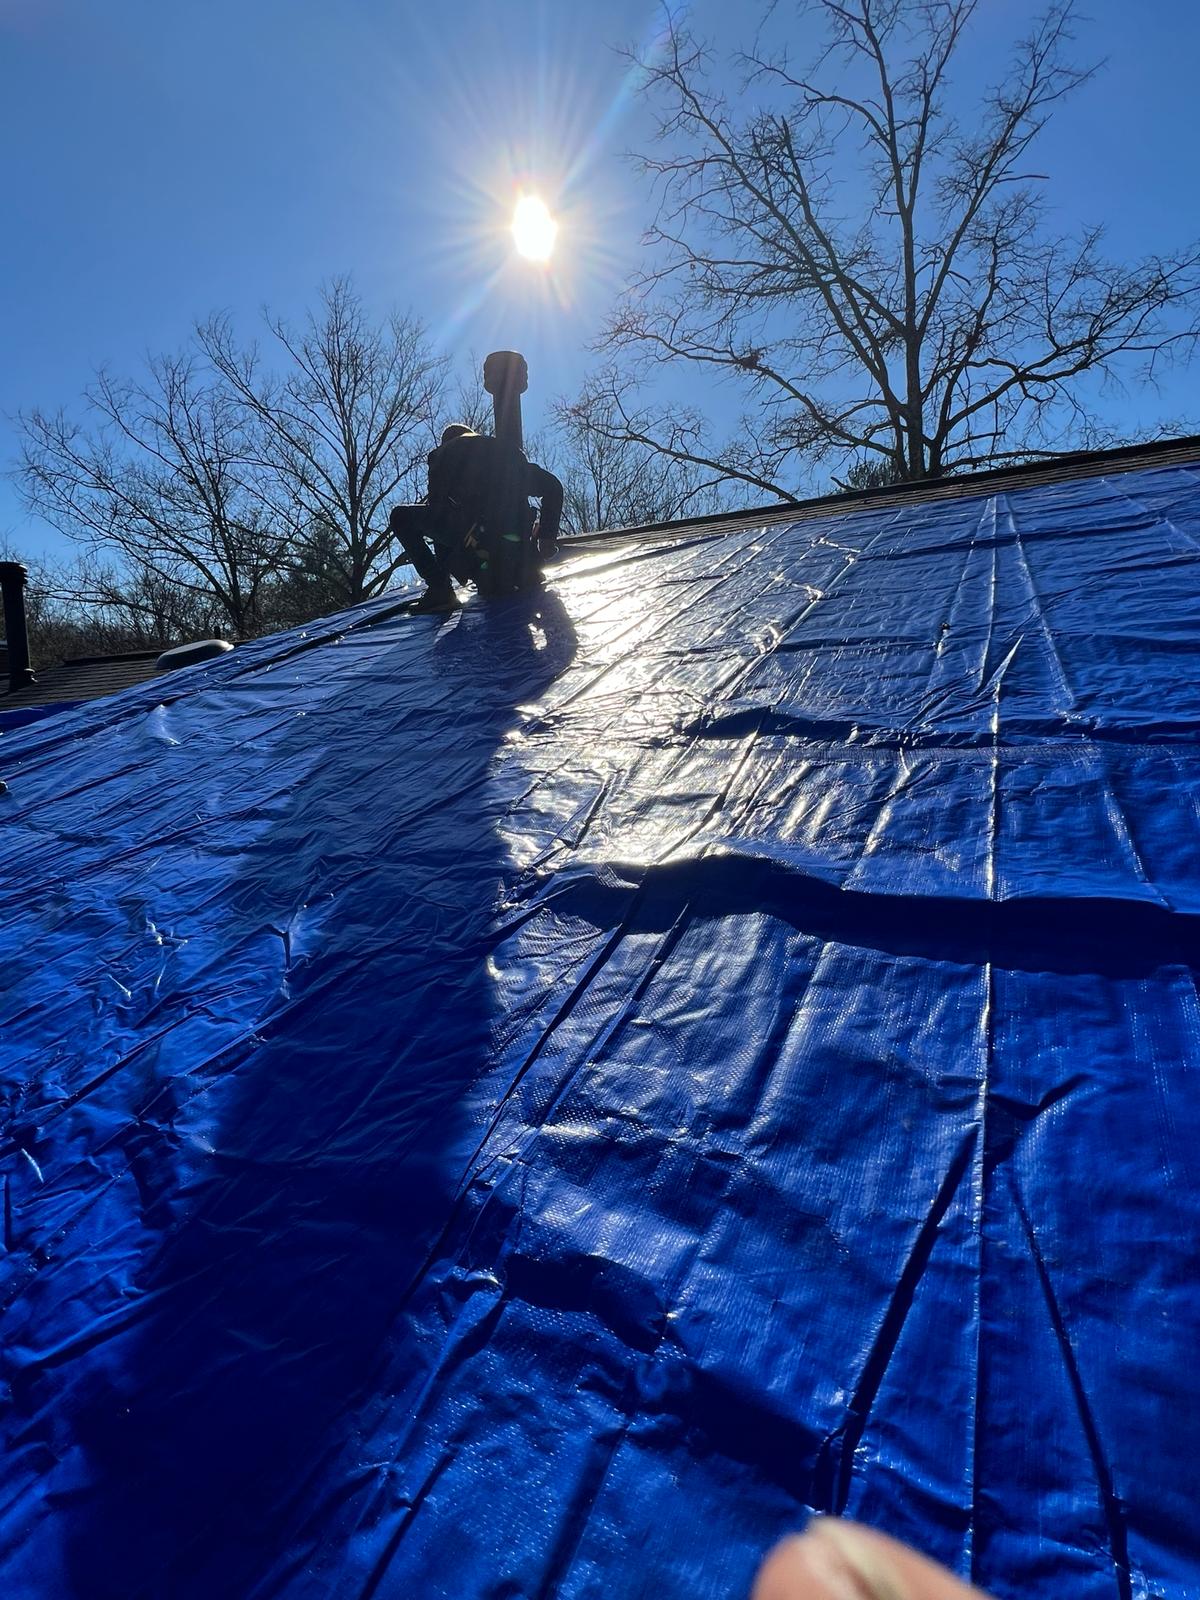 installing roof tarps to temporarily keep the water out in Columbia MD